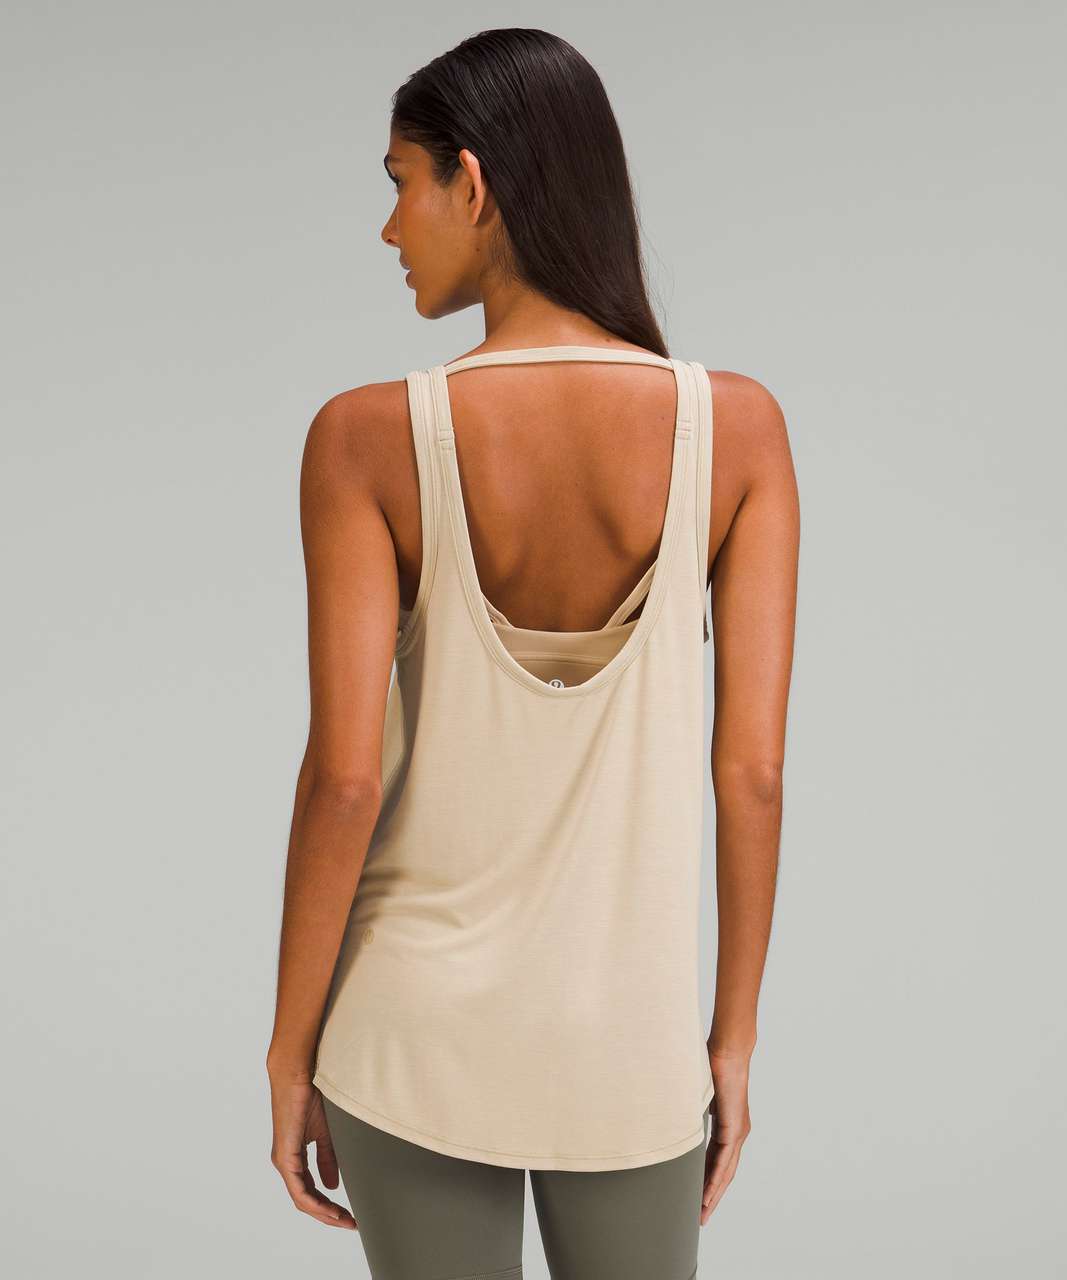 Lululemon Ease of It All Tank Top - Trench